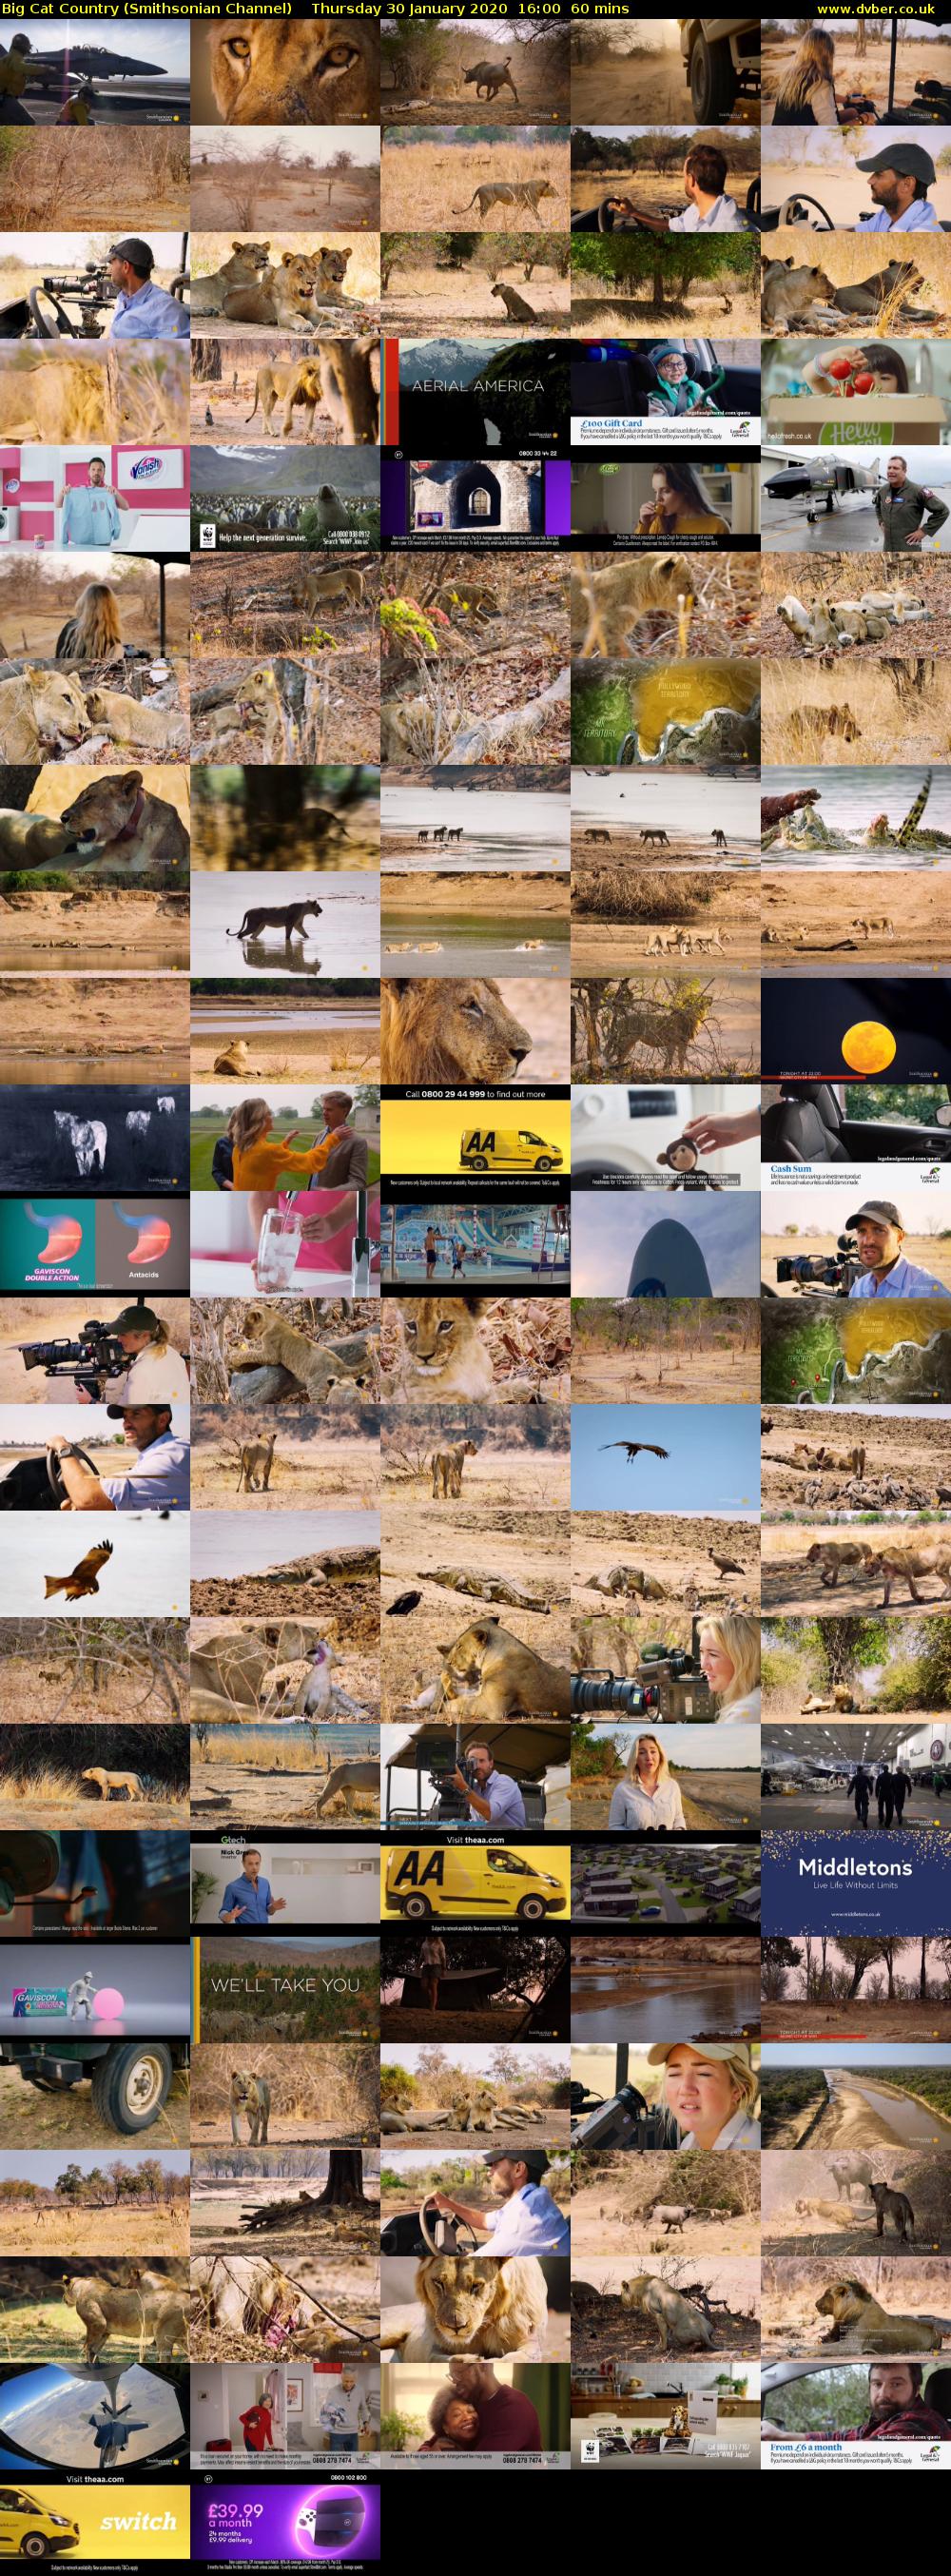 Big Cat Country (Smithsonian Channel) Thursday 30 January 2020 16:00 - 17:00